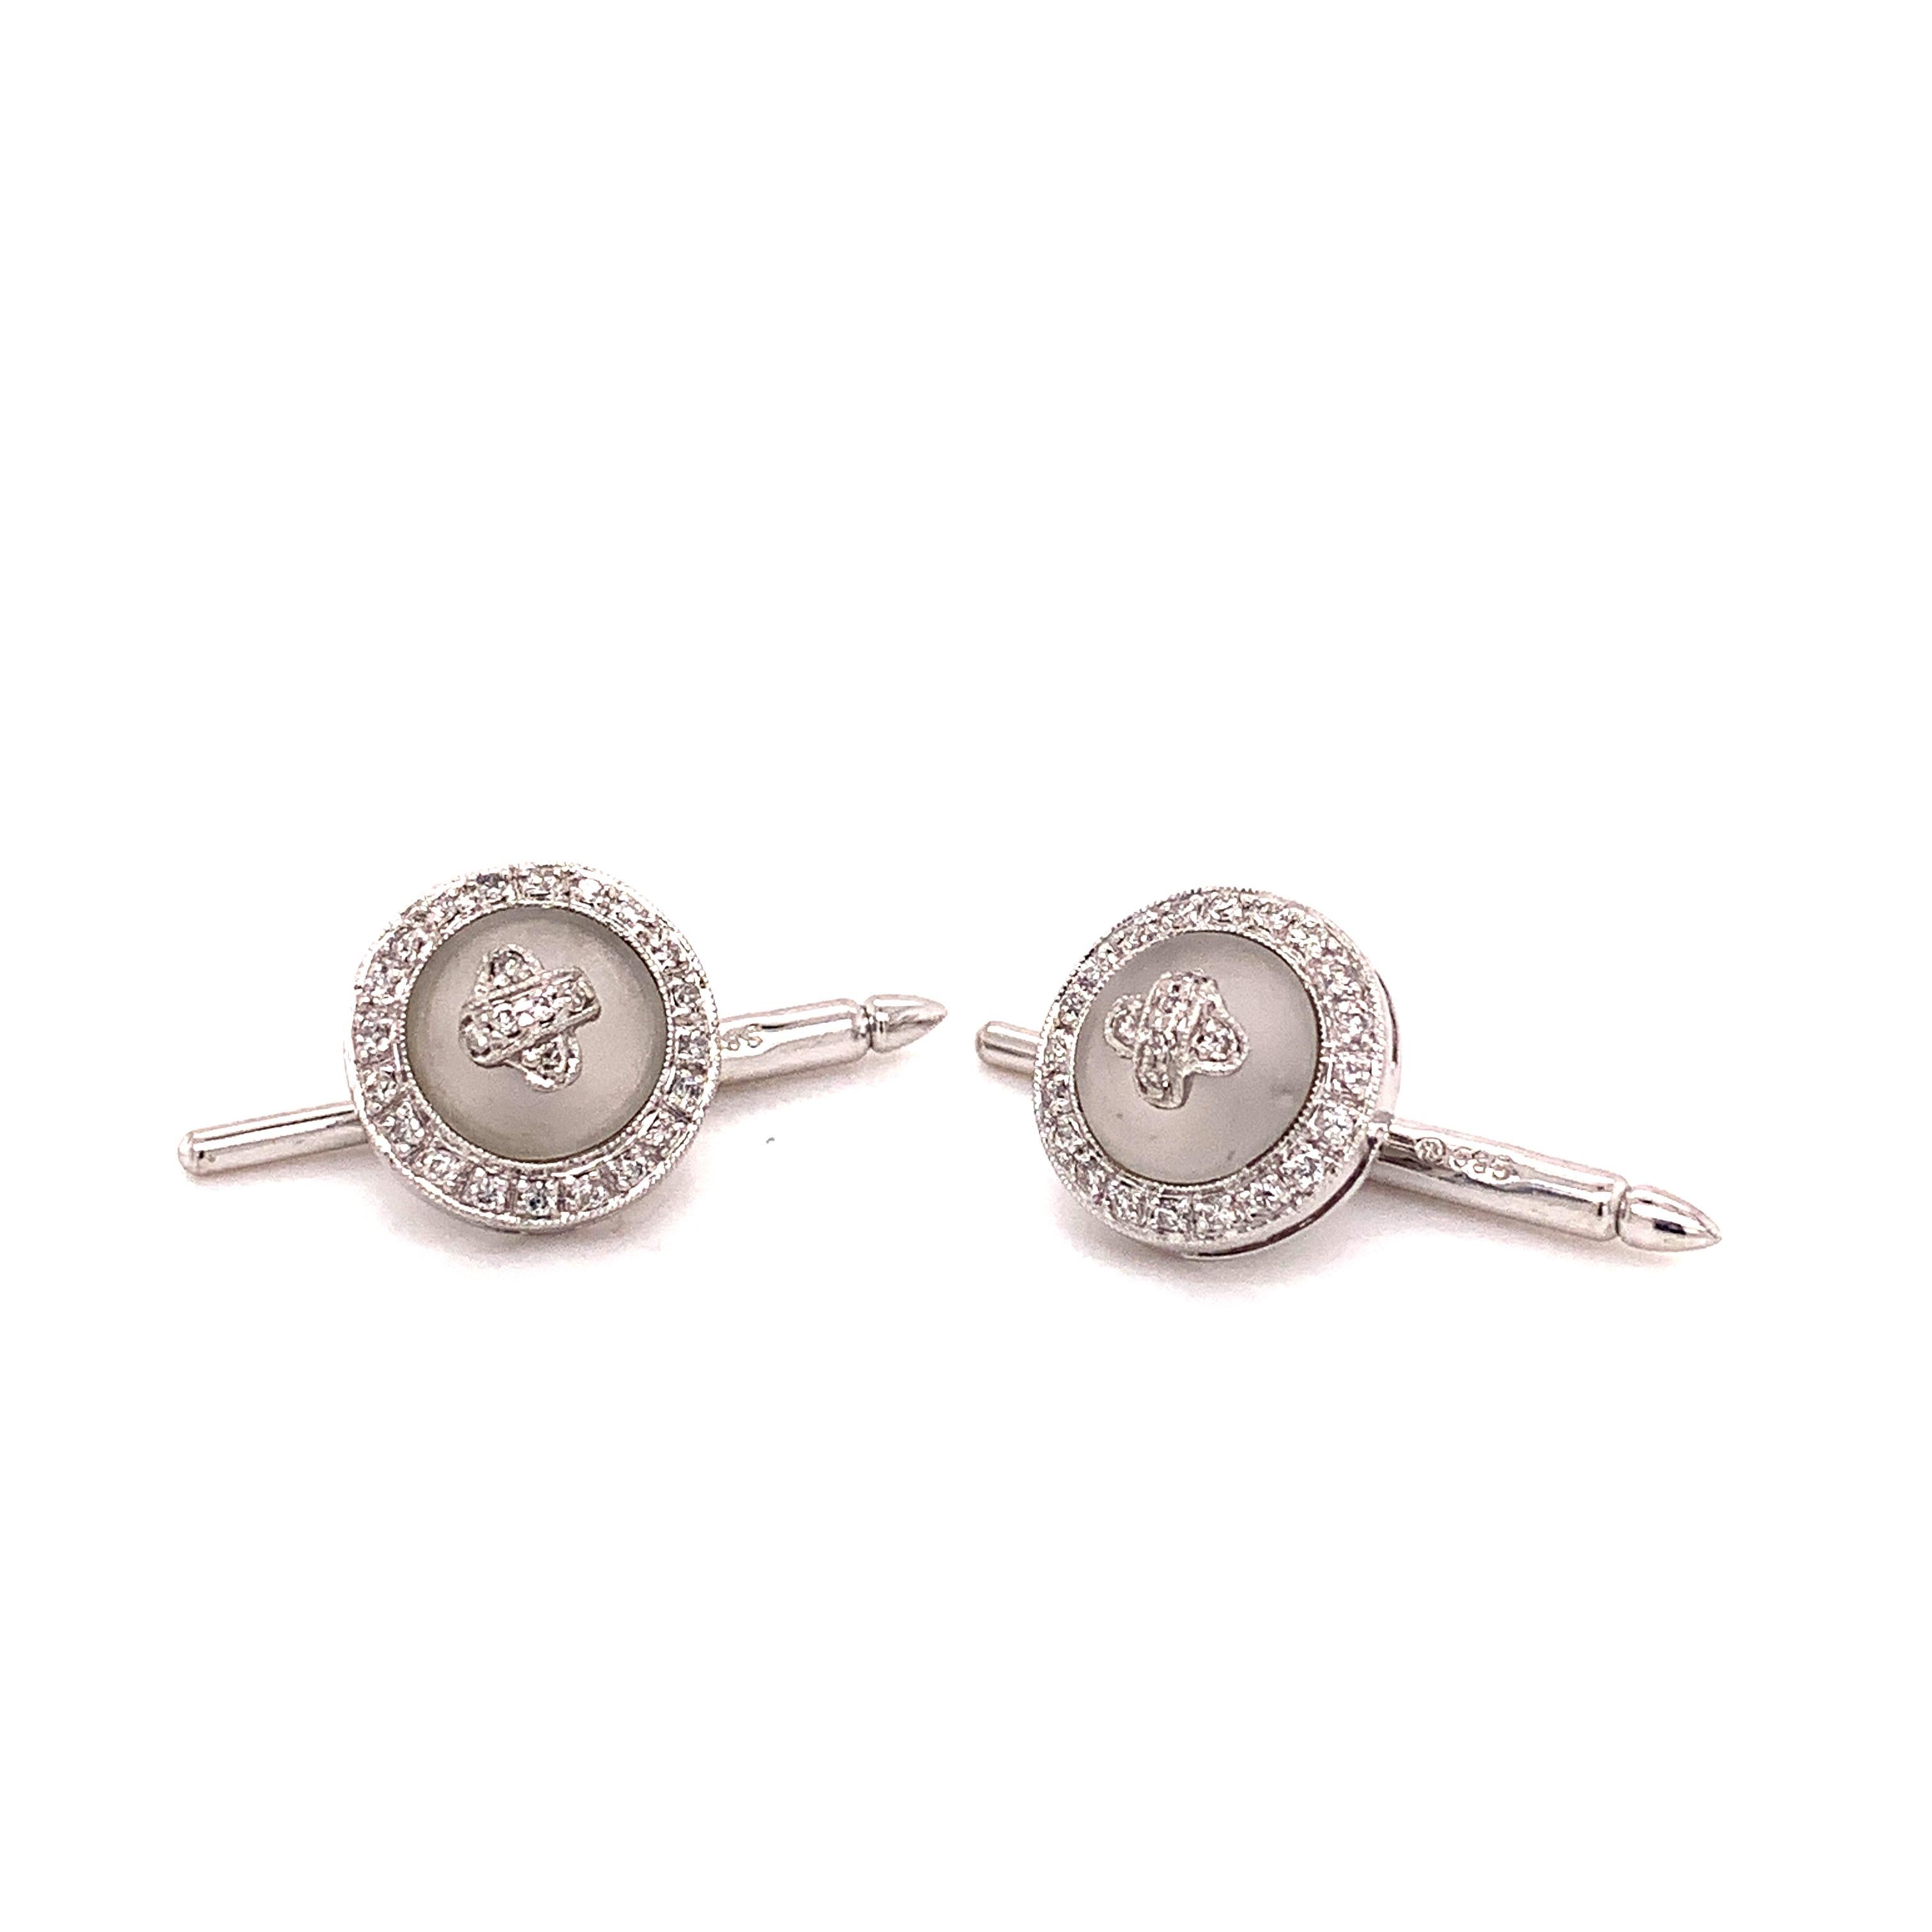 Men's Sophia D. 0.63 Carat Diamond with Frosted Crystal Cufflinks For Sale